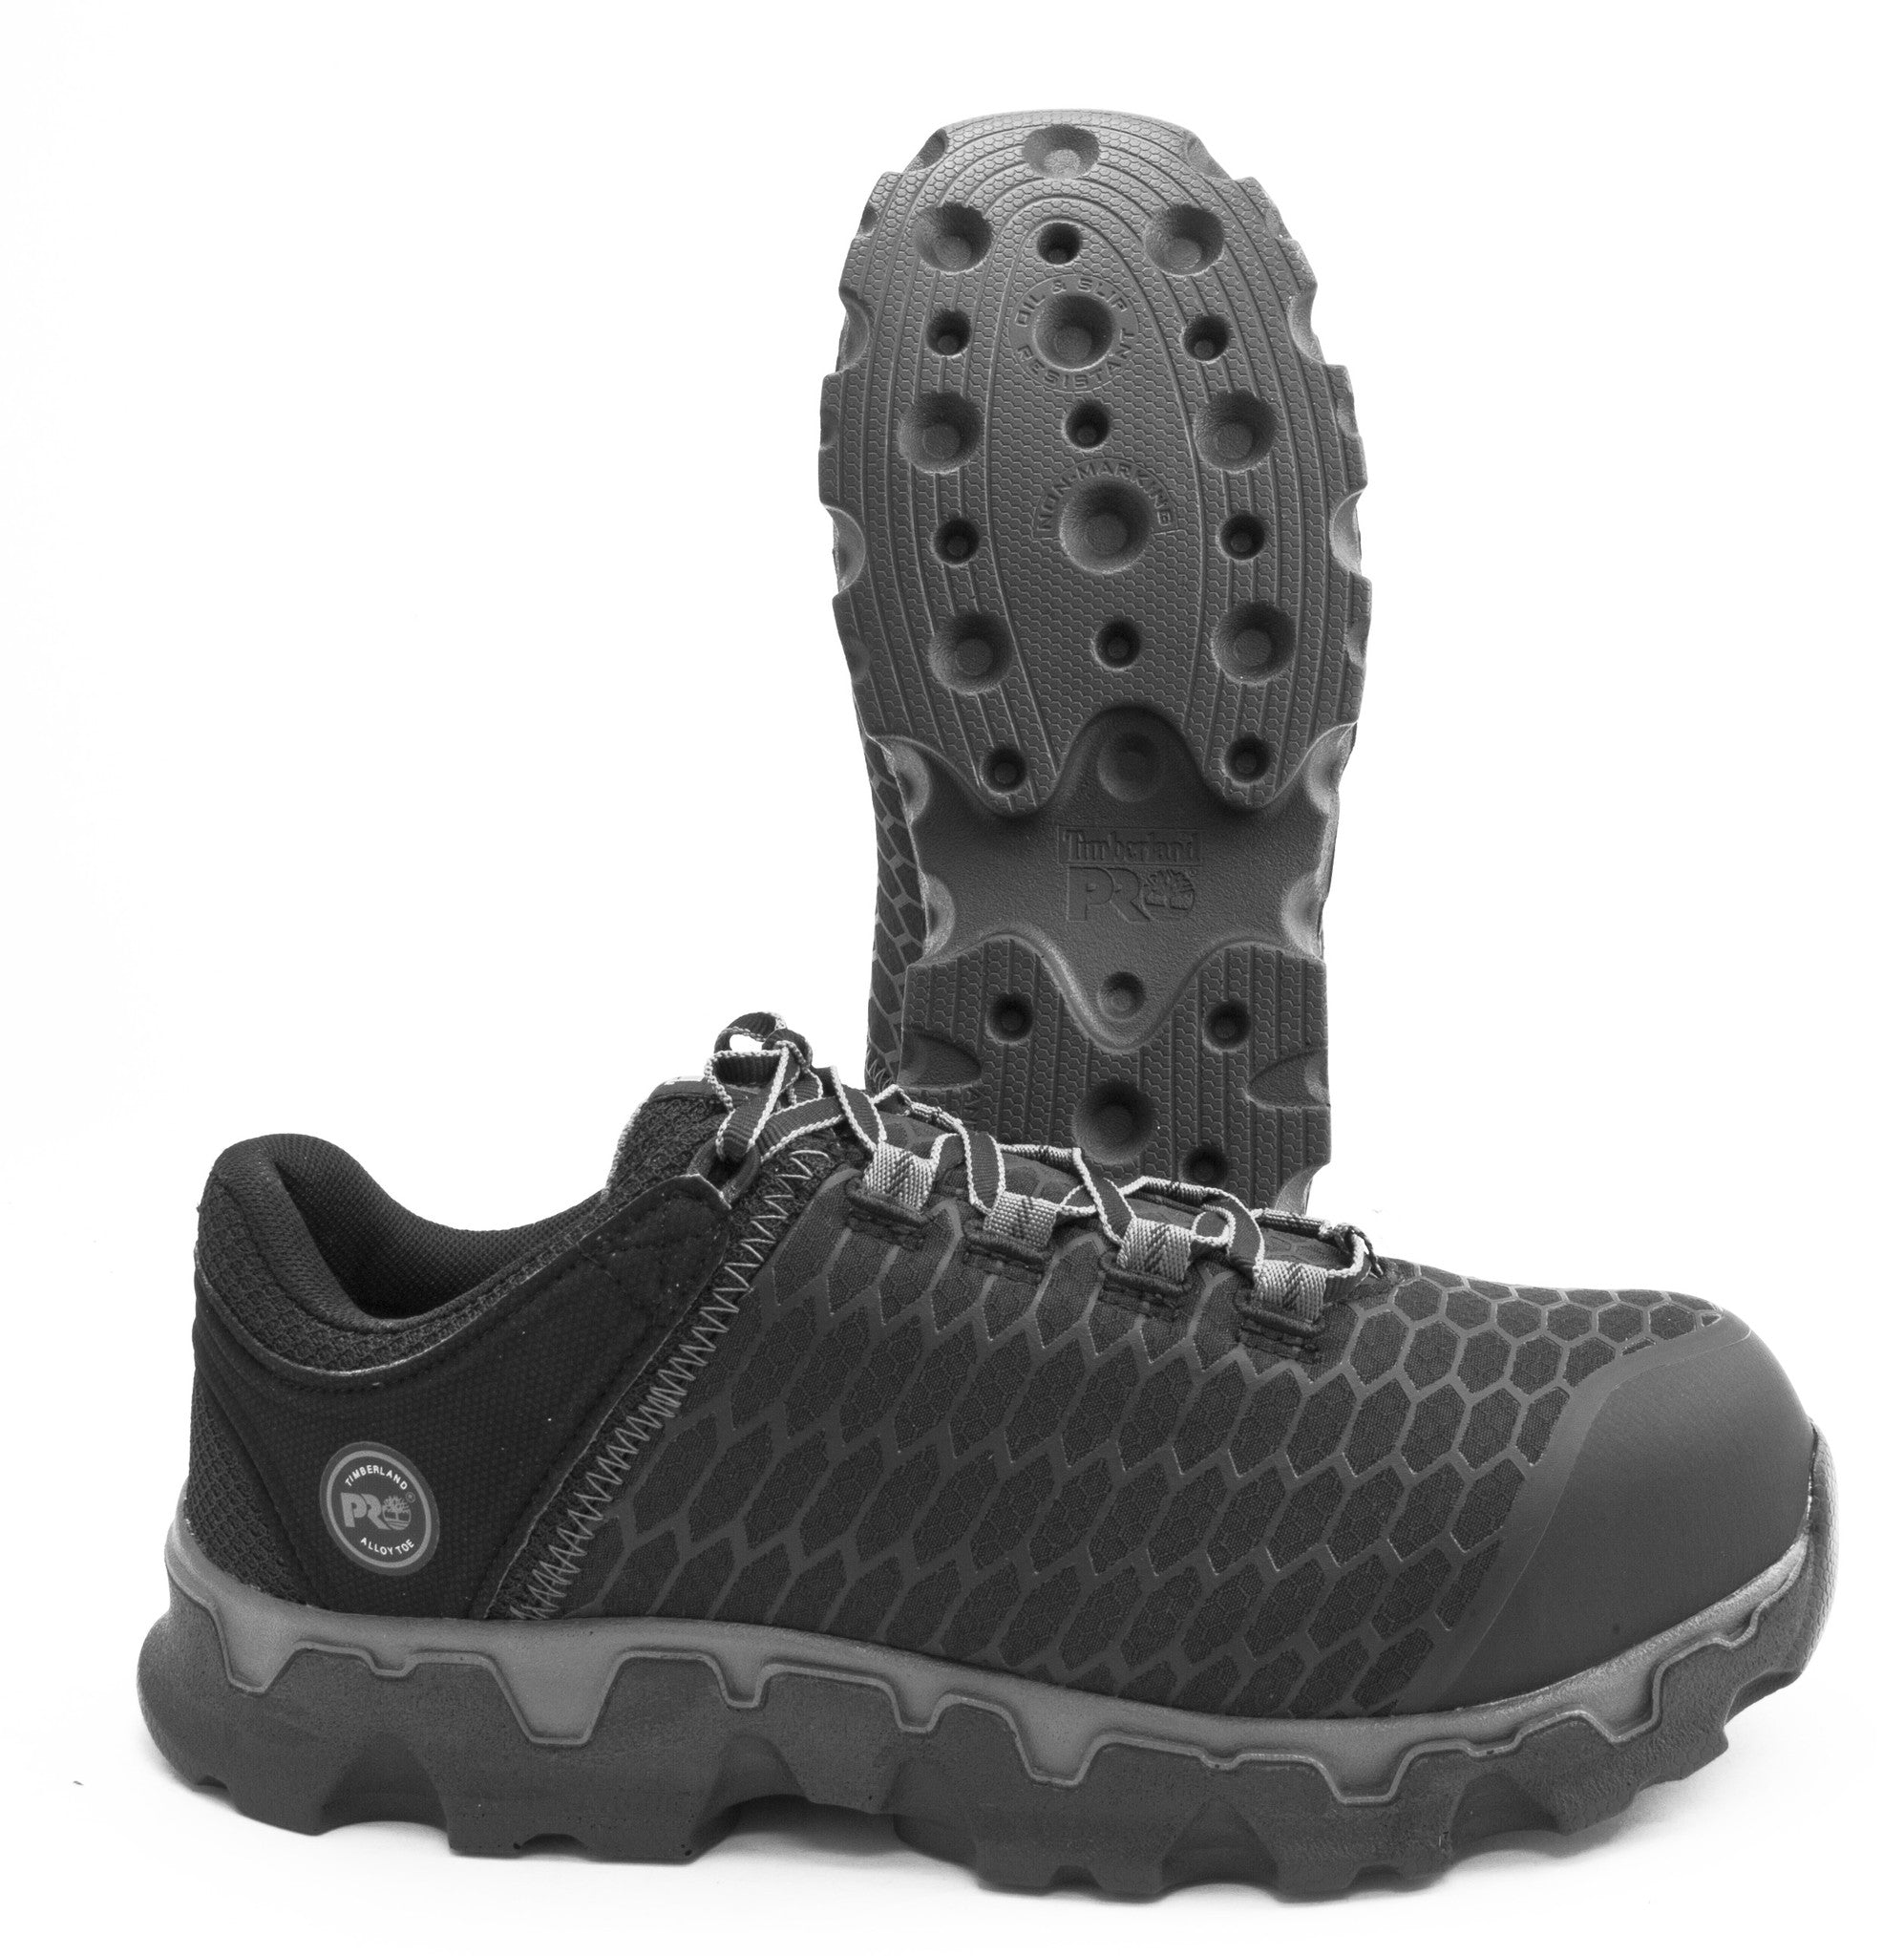 Timberland PRO Women's Powertrain Sport TB0A1B7F001, Non-Marking OR SR AT EH Athletic Shoe